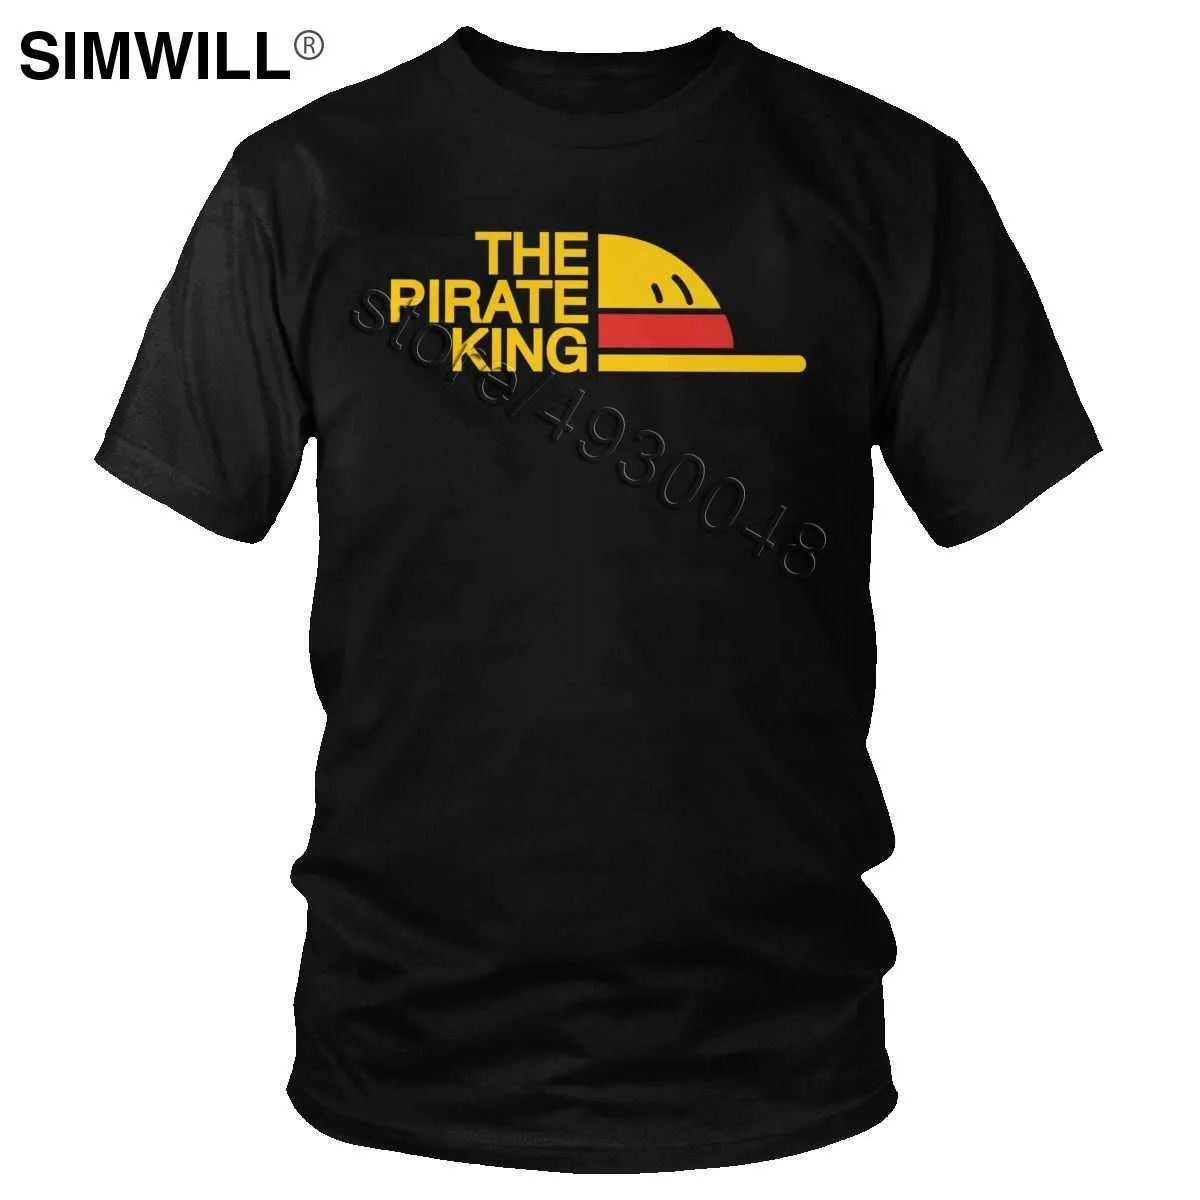 Men's T-Shirts Summer New Arrival Cotton One Piece T-Shirt Short Sleeves Manga The Pirate King Graphic Tee Dropshipping Anime T Shirt Clothes T221006